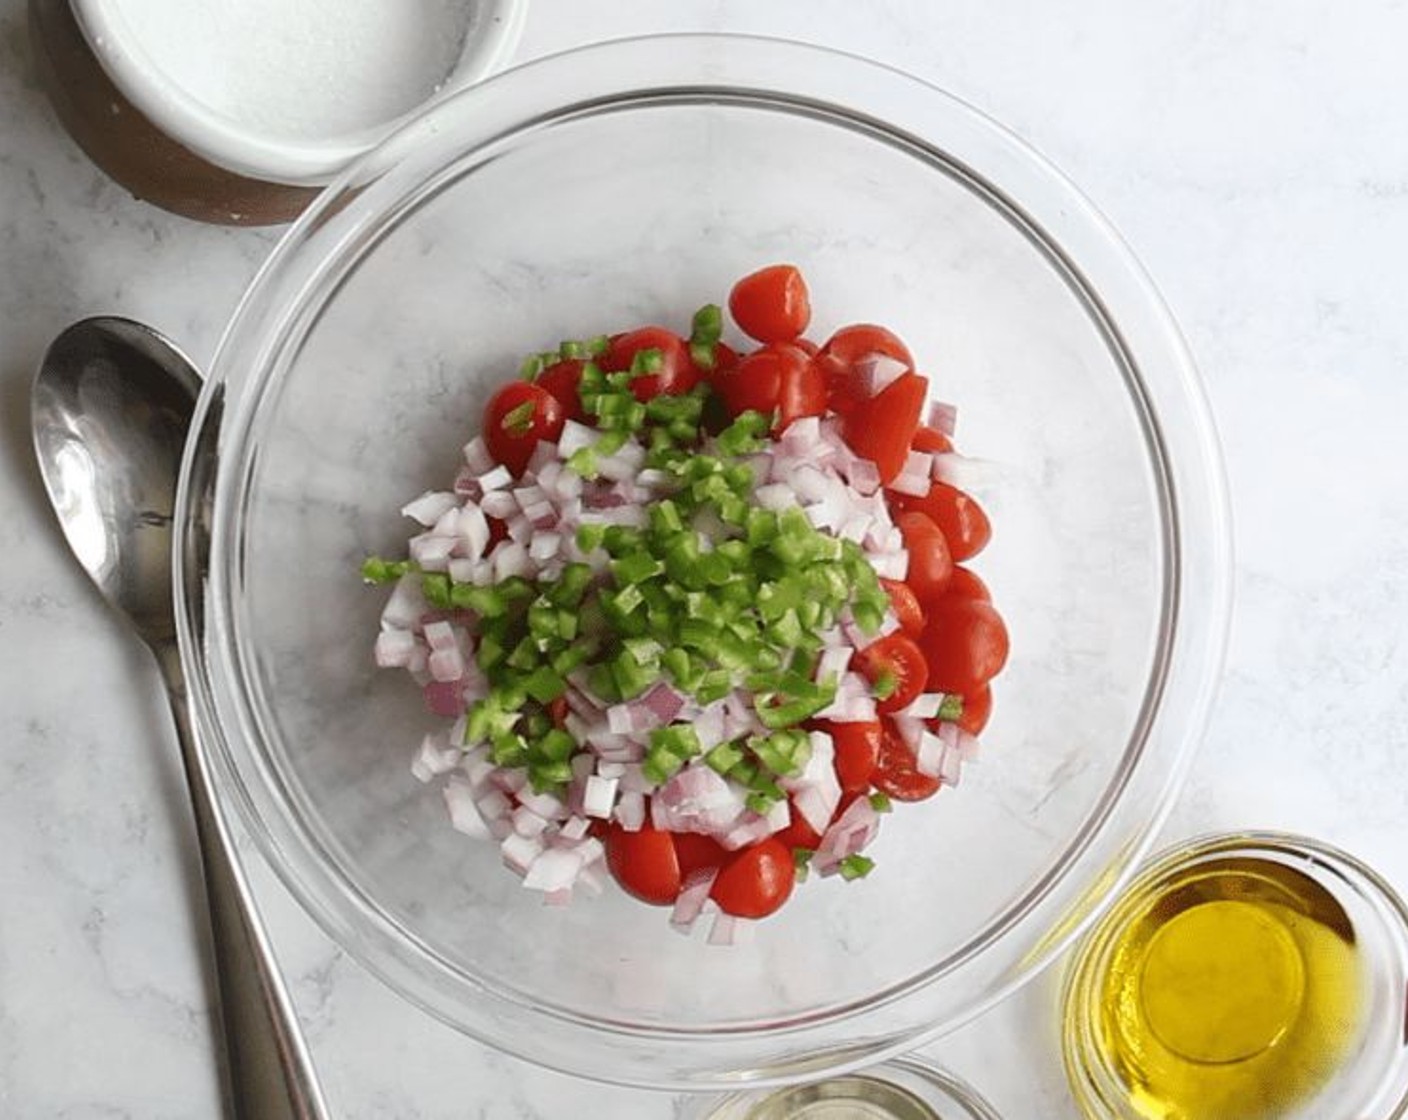 step 7 Make the salsa: In a medium bowl, combine the Cherry Tomatoes (1 1/4 cups), Red Onion (1/2 cup), Jalapeño Pepper (1), Kosher Salt (1 pinch), Extra-Virgin Olive Oil (2 Tbsp), and White Balsamic Vinegar (1 Tbsp). Taste and adjust seasoning as needed.